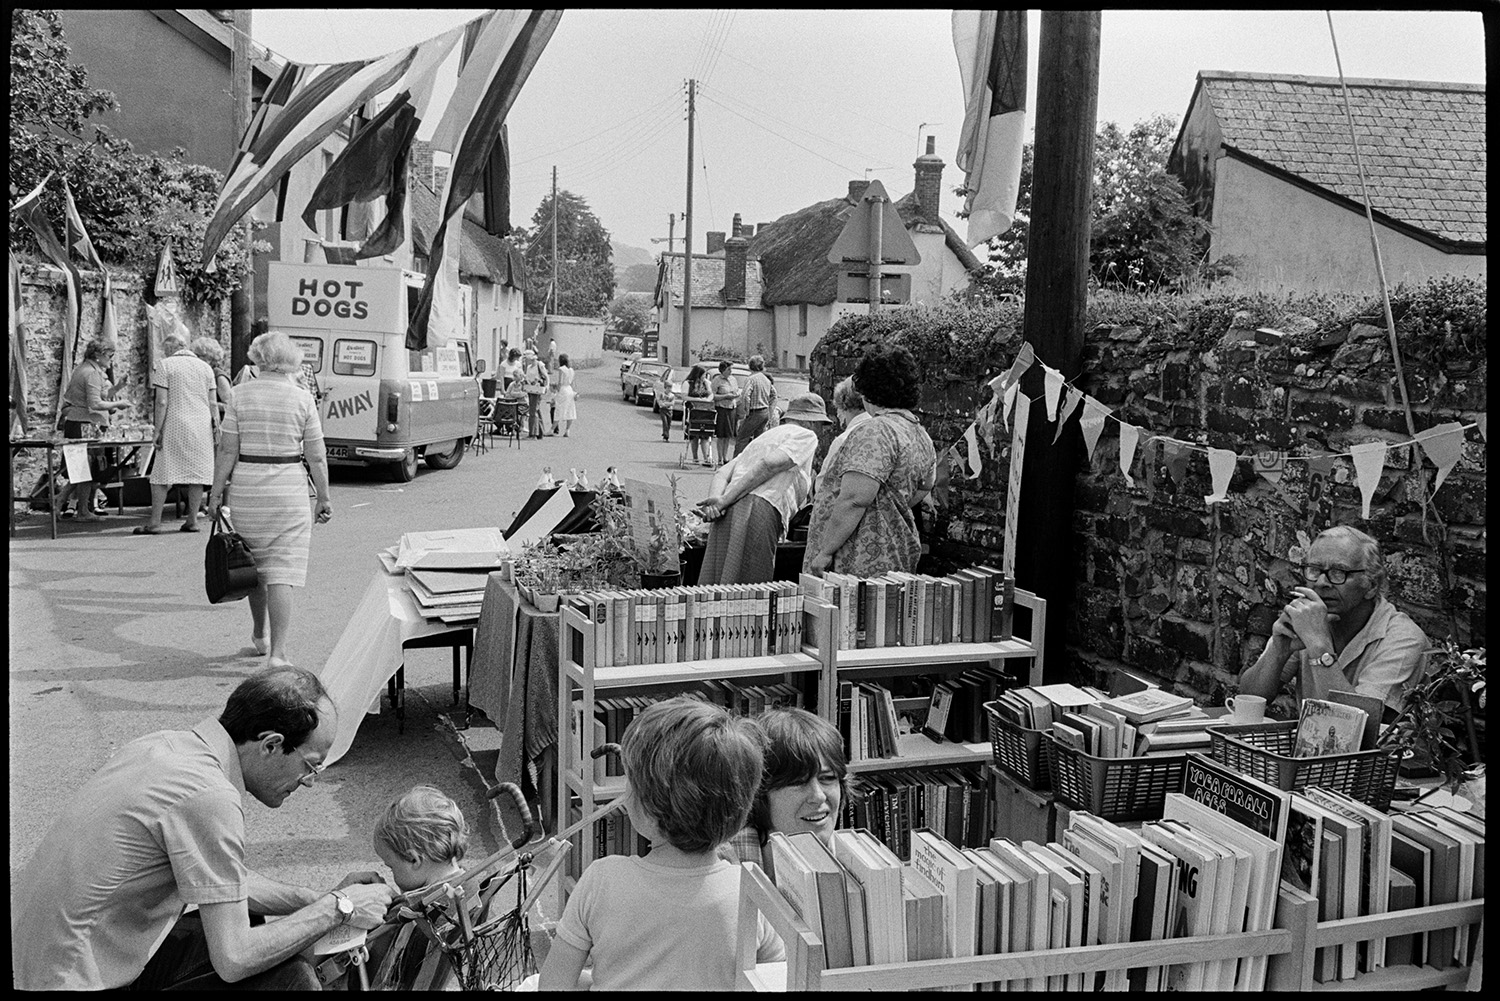 Open air market, village square part of festival, stalls, flags, crafts, books, plants. 
[A family looking at a book stall at Dolton Festival or open air market. Bunting is hung up behind the stall and flags are suspended between lamp posts. A hot dog van can be seen in the background.]